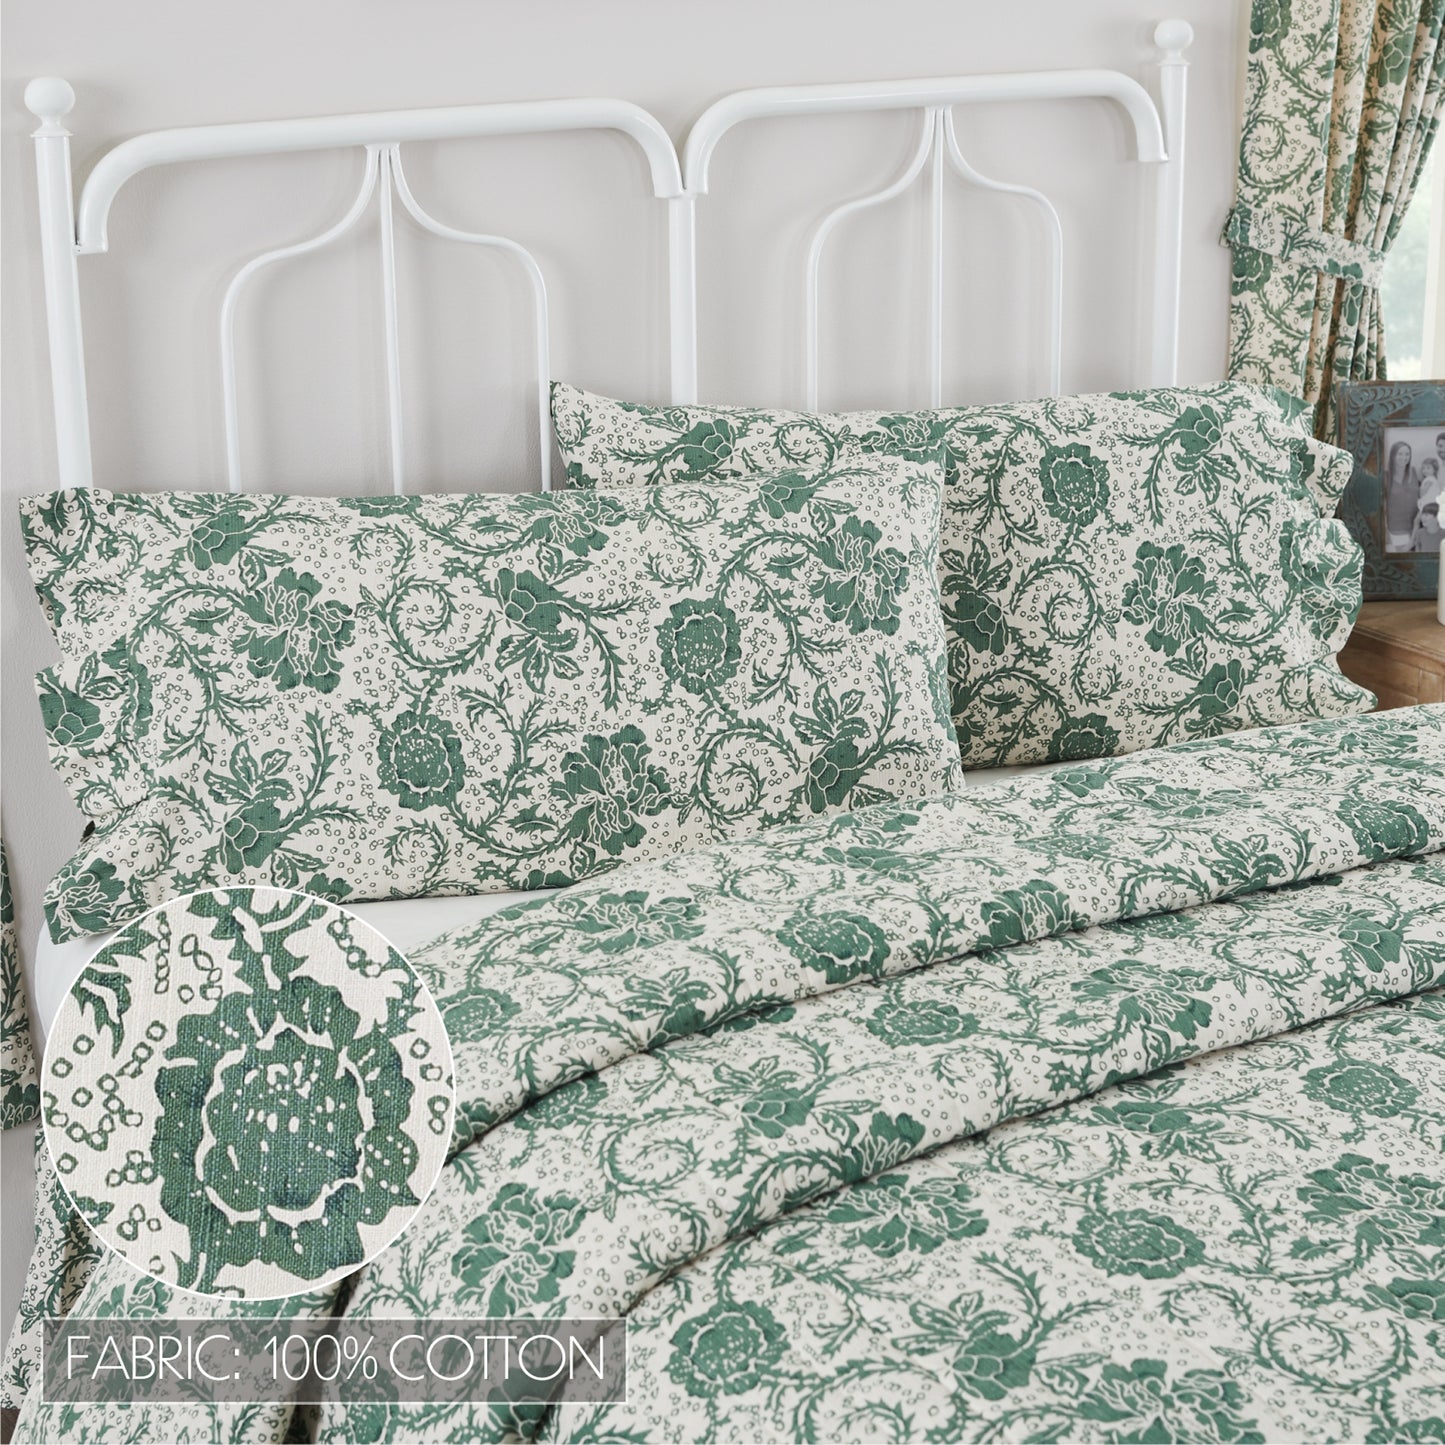 81220-Dorset-Green-Floral-Ruffled-King-Pillow-Case-Set-of-2-21x36-4-image-2